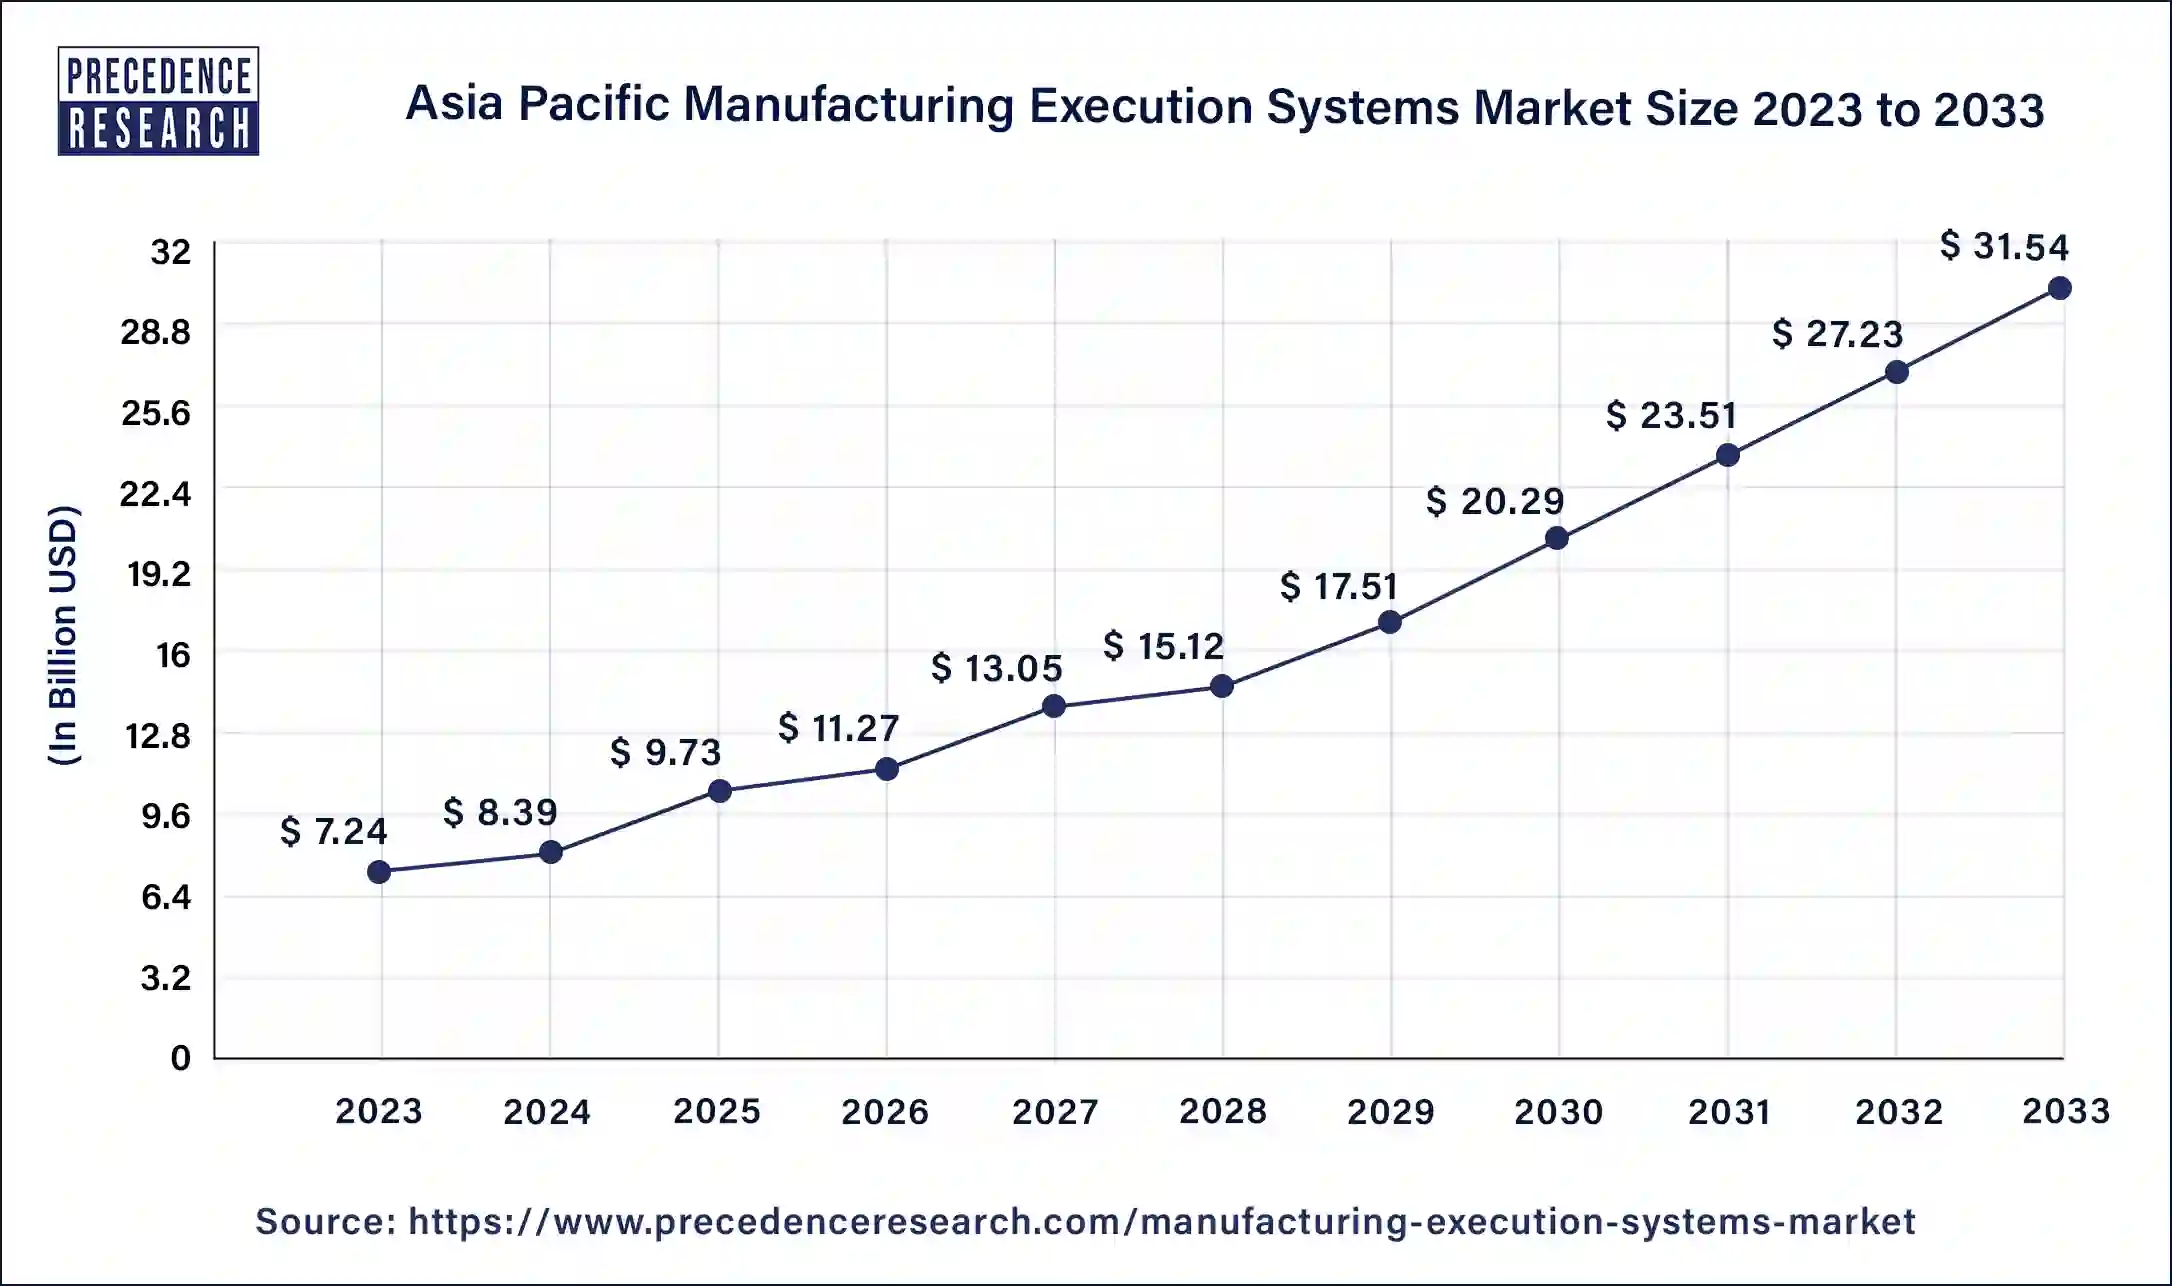 Asia Pacific Manufacturing Execution Systems Market Size 2024 to 2033